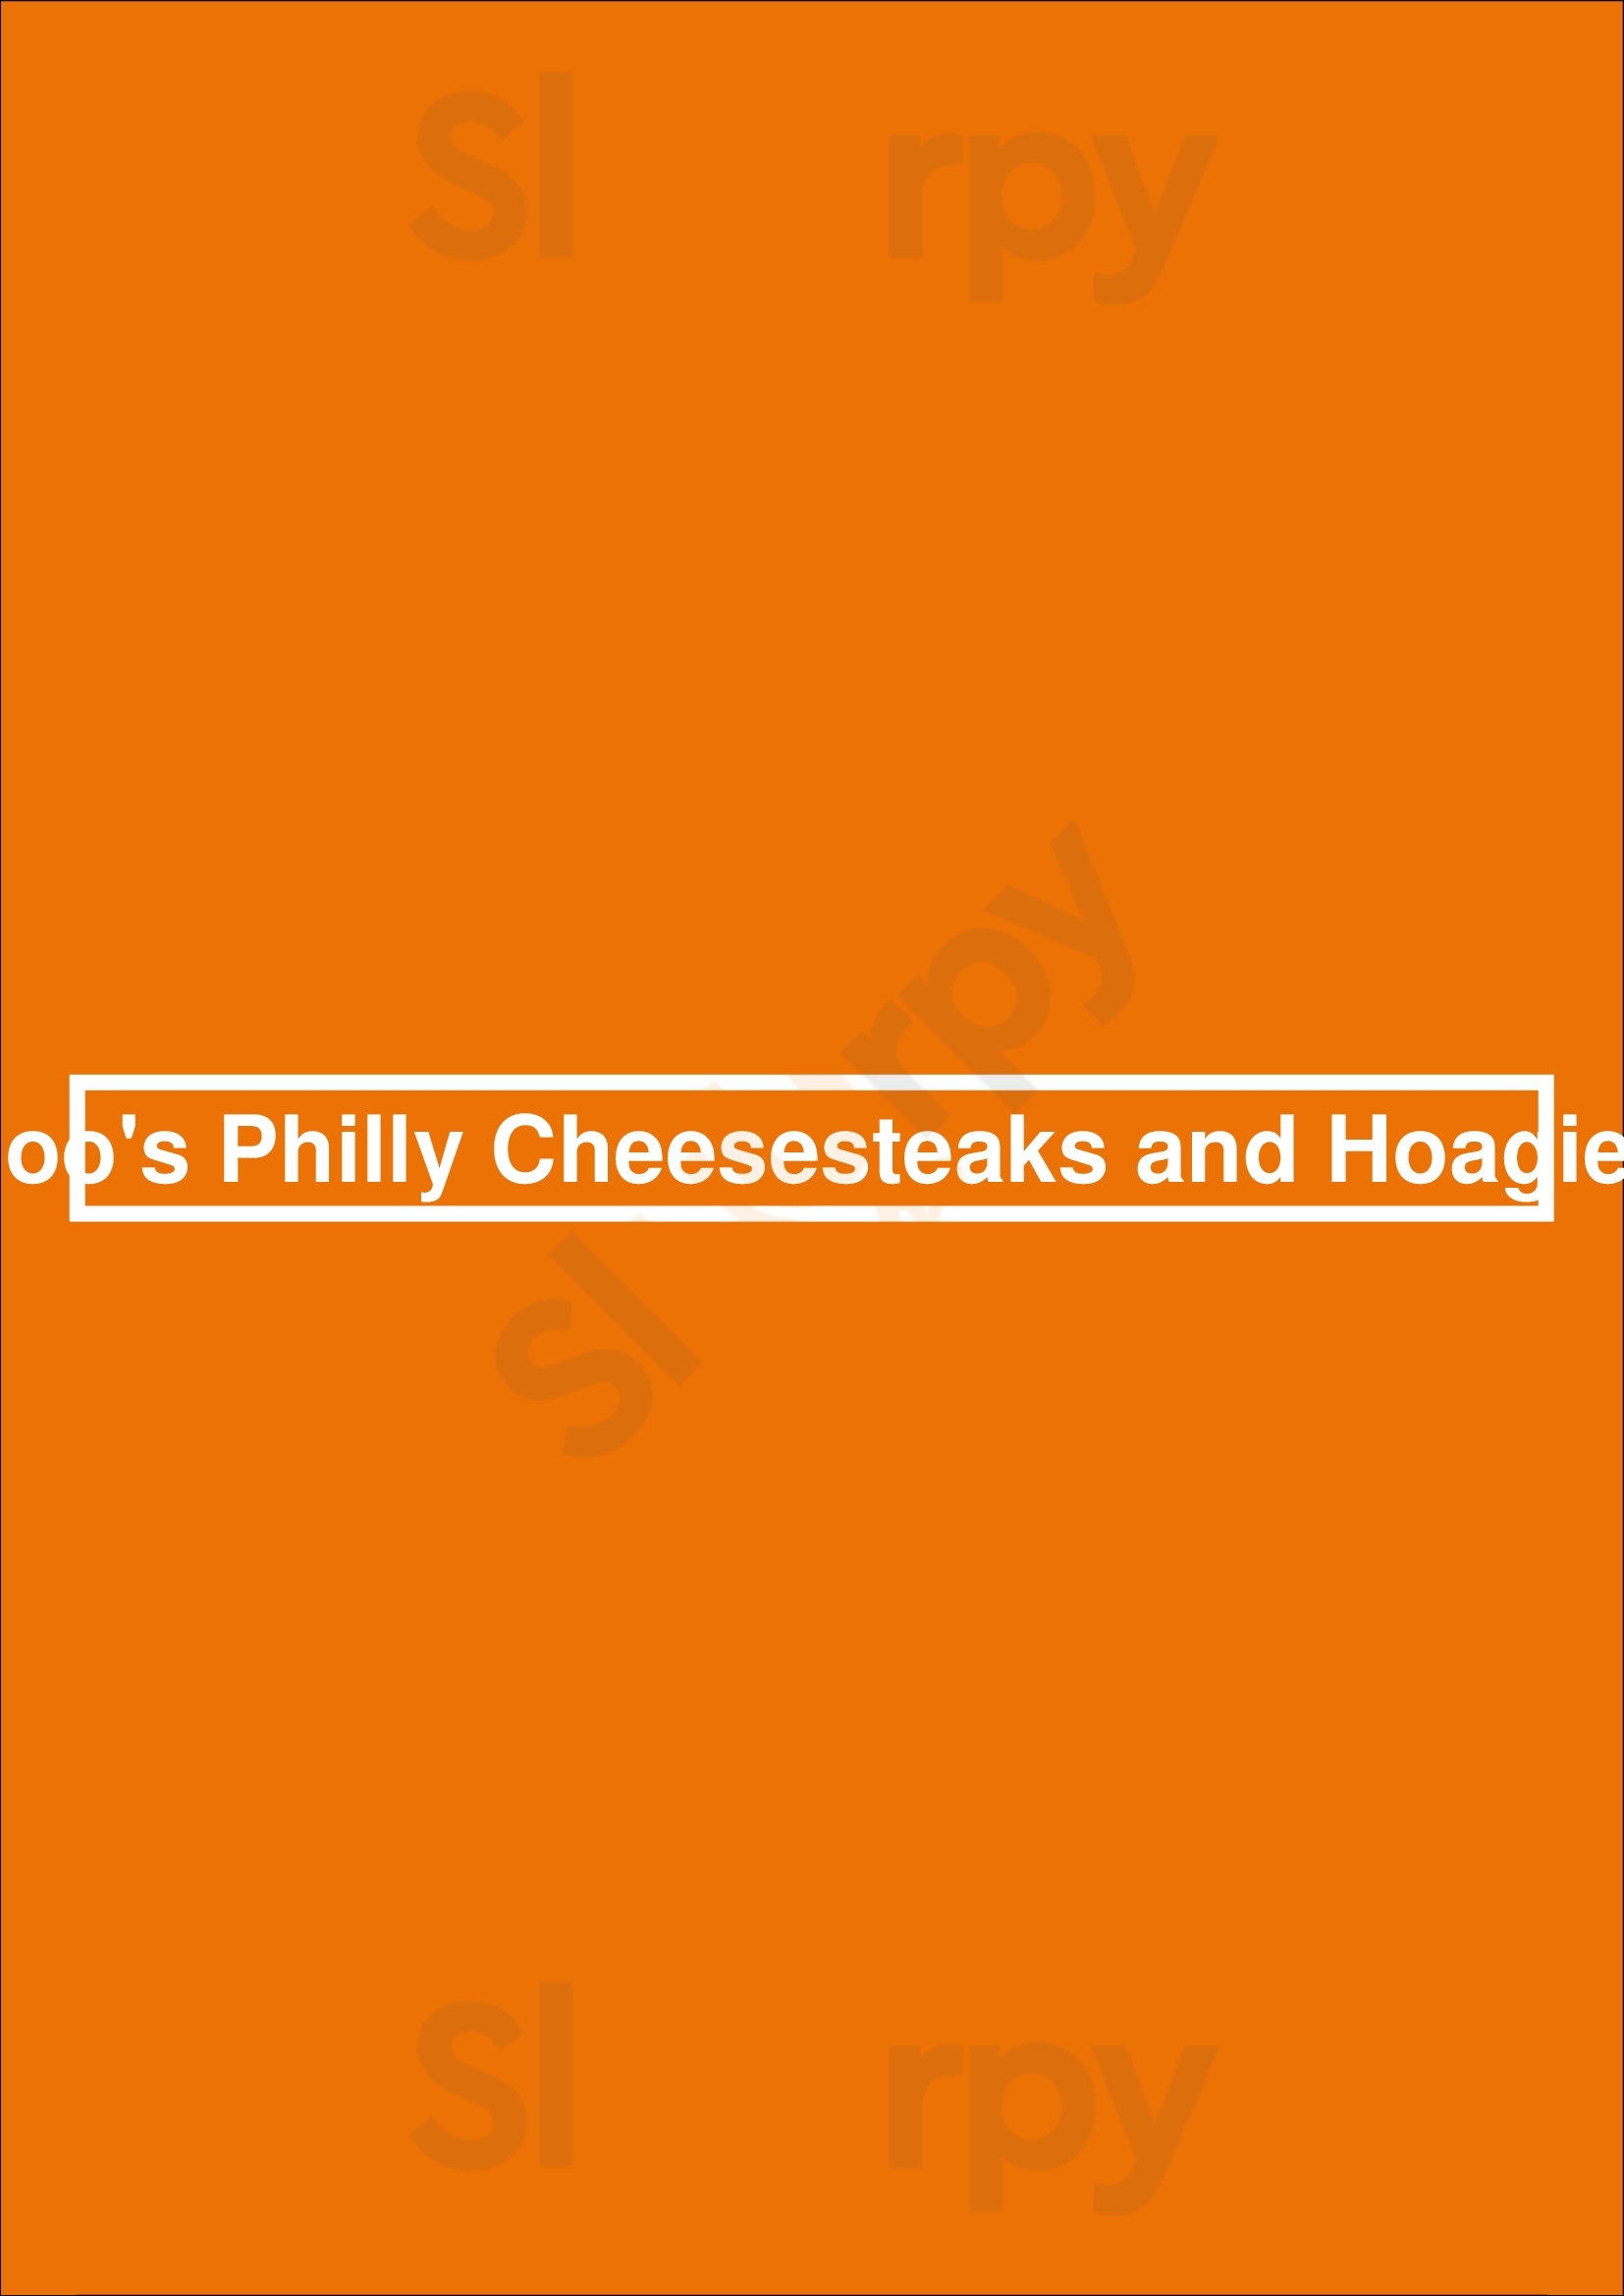 Boo's Philly Cheesesteaks And Hoagies Los Angeles Menu - 1